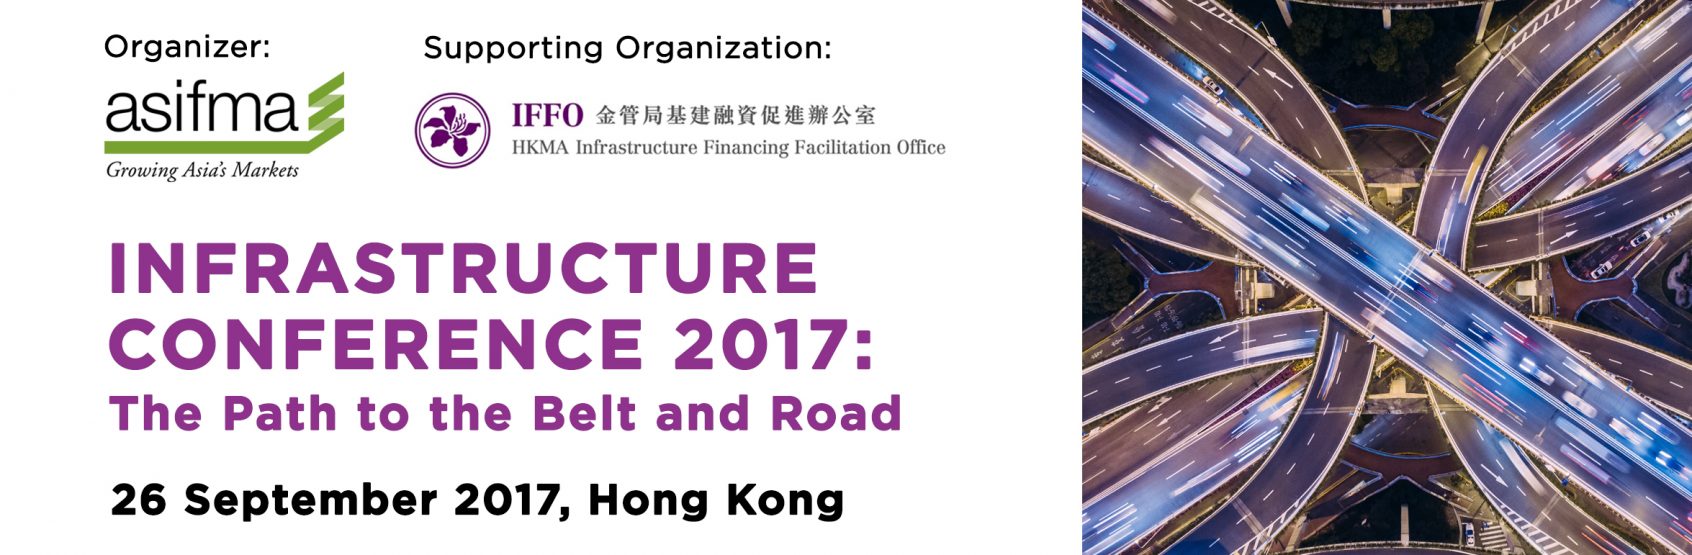 infrastructure-conference_high-res